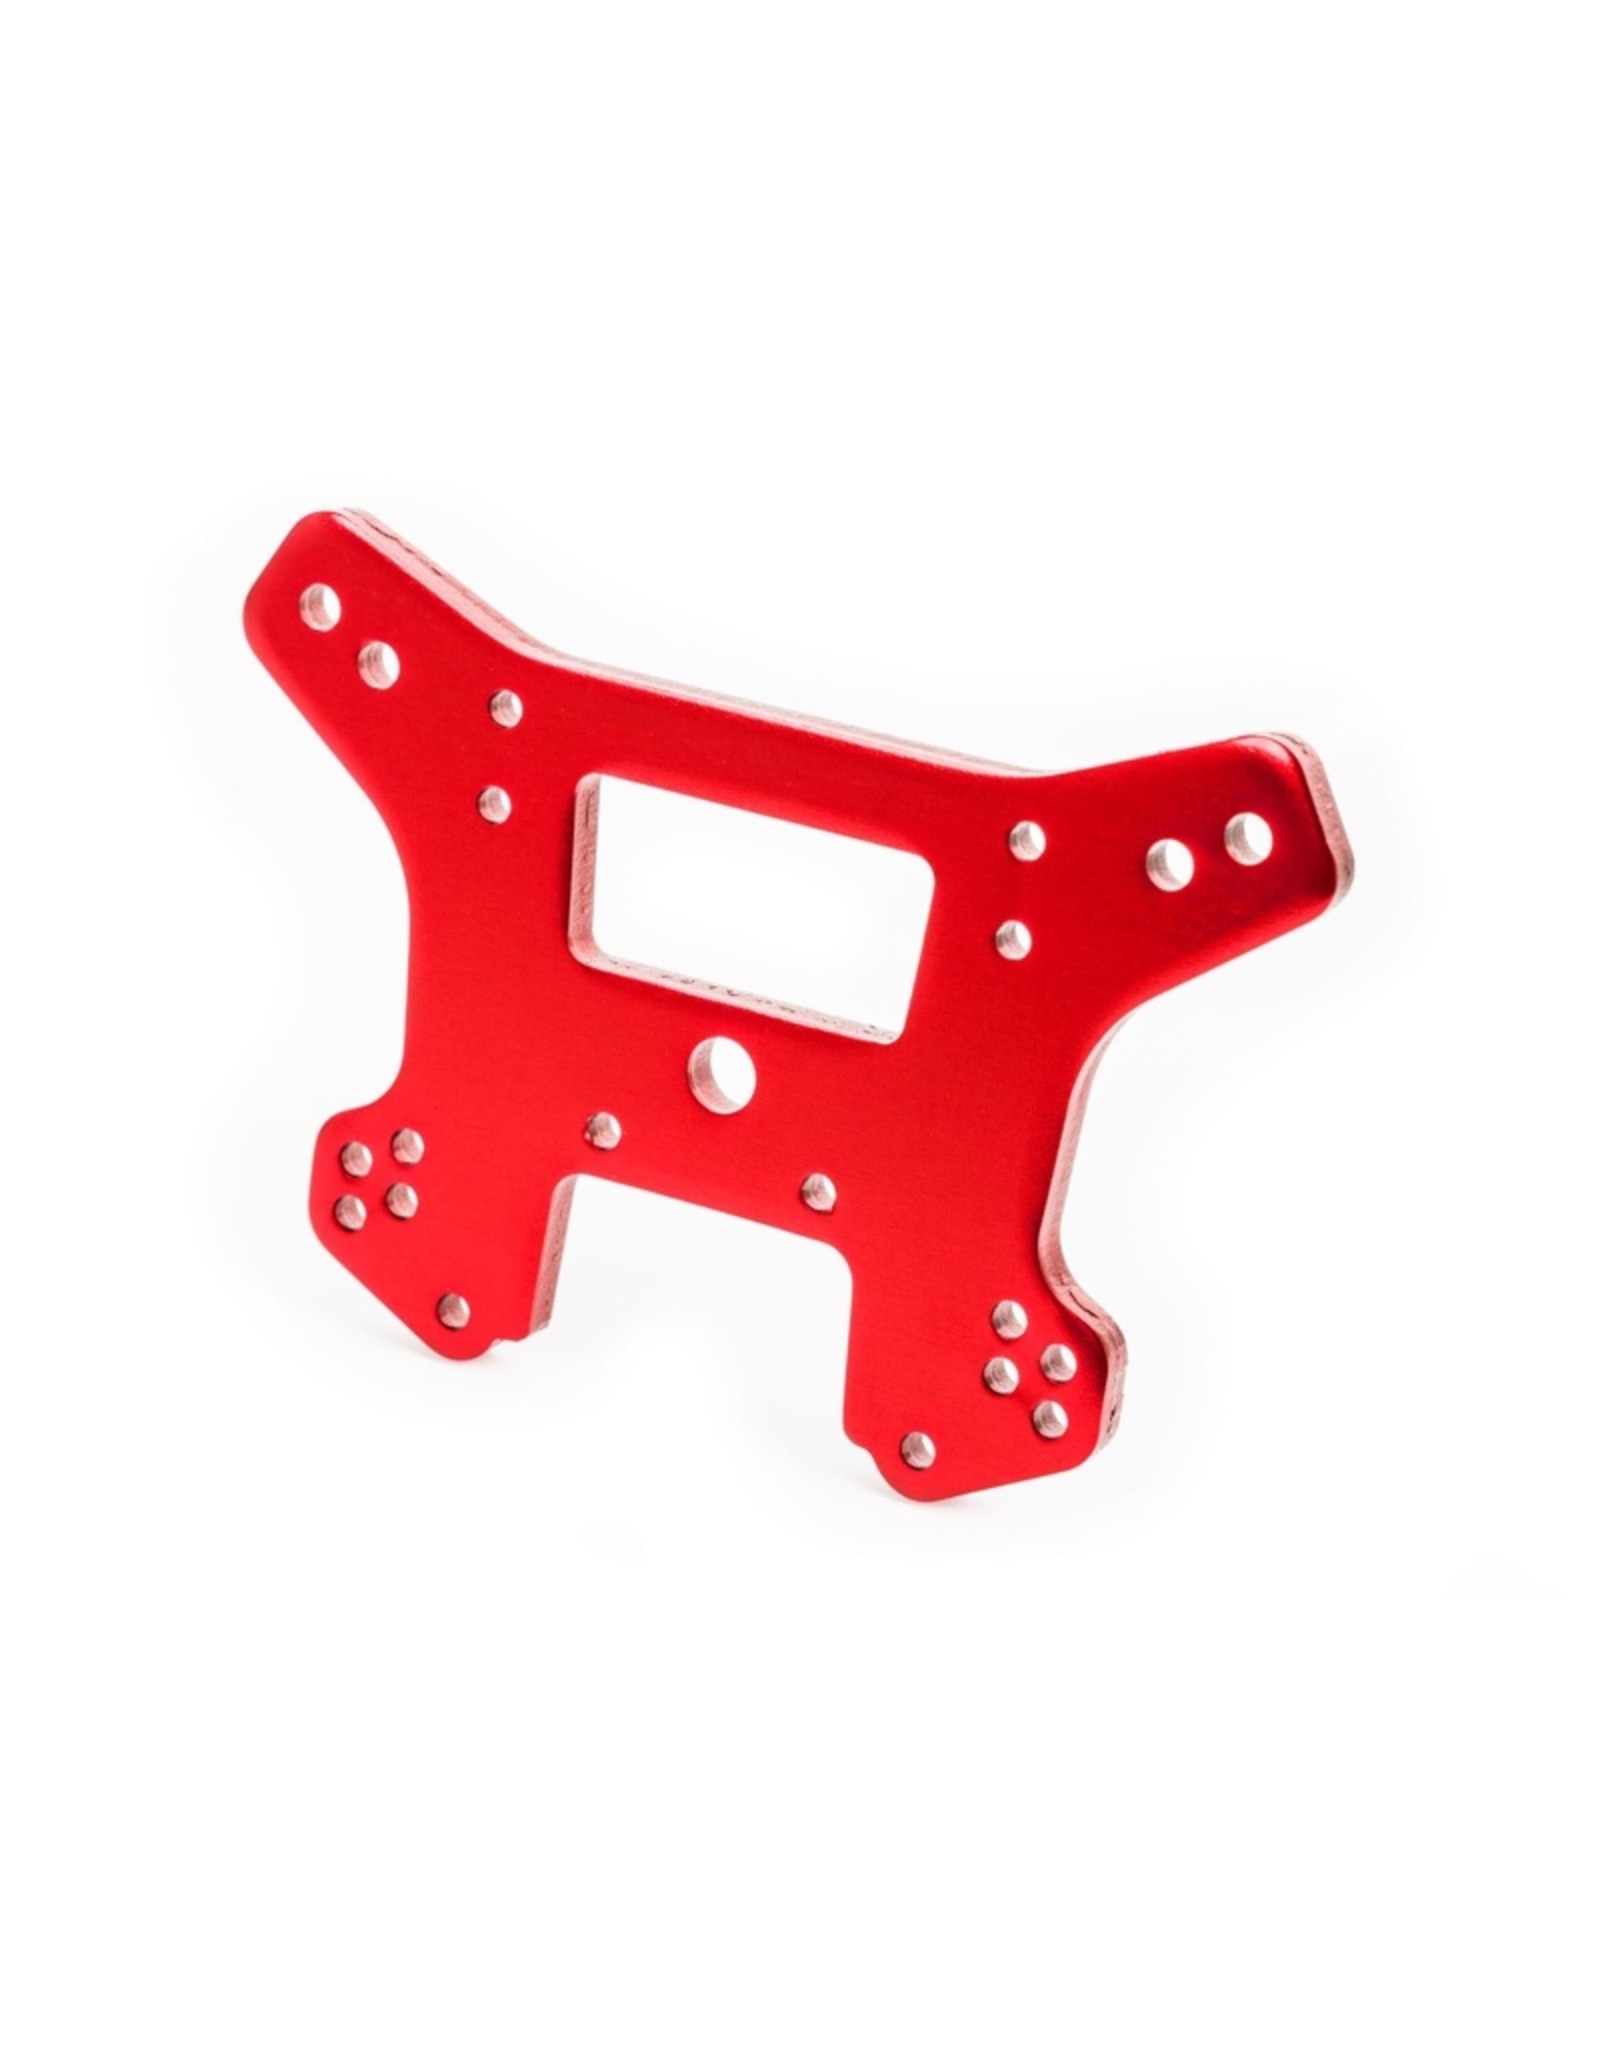 Traxxas TRA9539R SHOCK TOWER FRONT ALUM RED SLEDGE